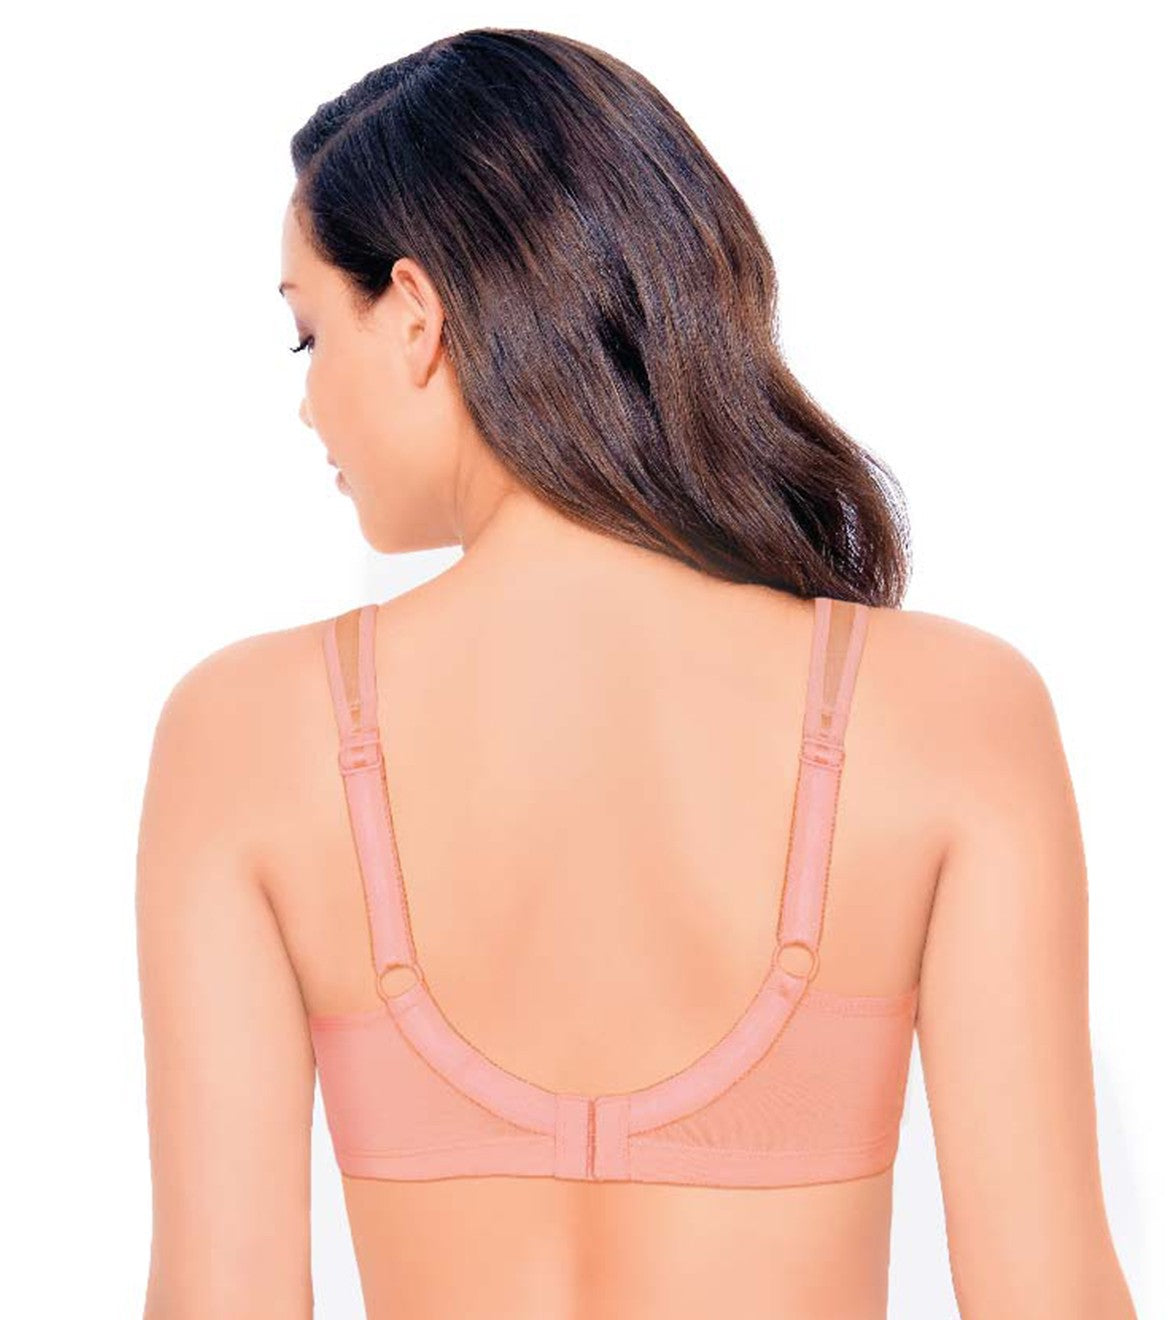 A padded bra is a way to be stylish and comfortable at the same